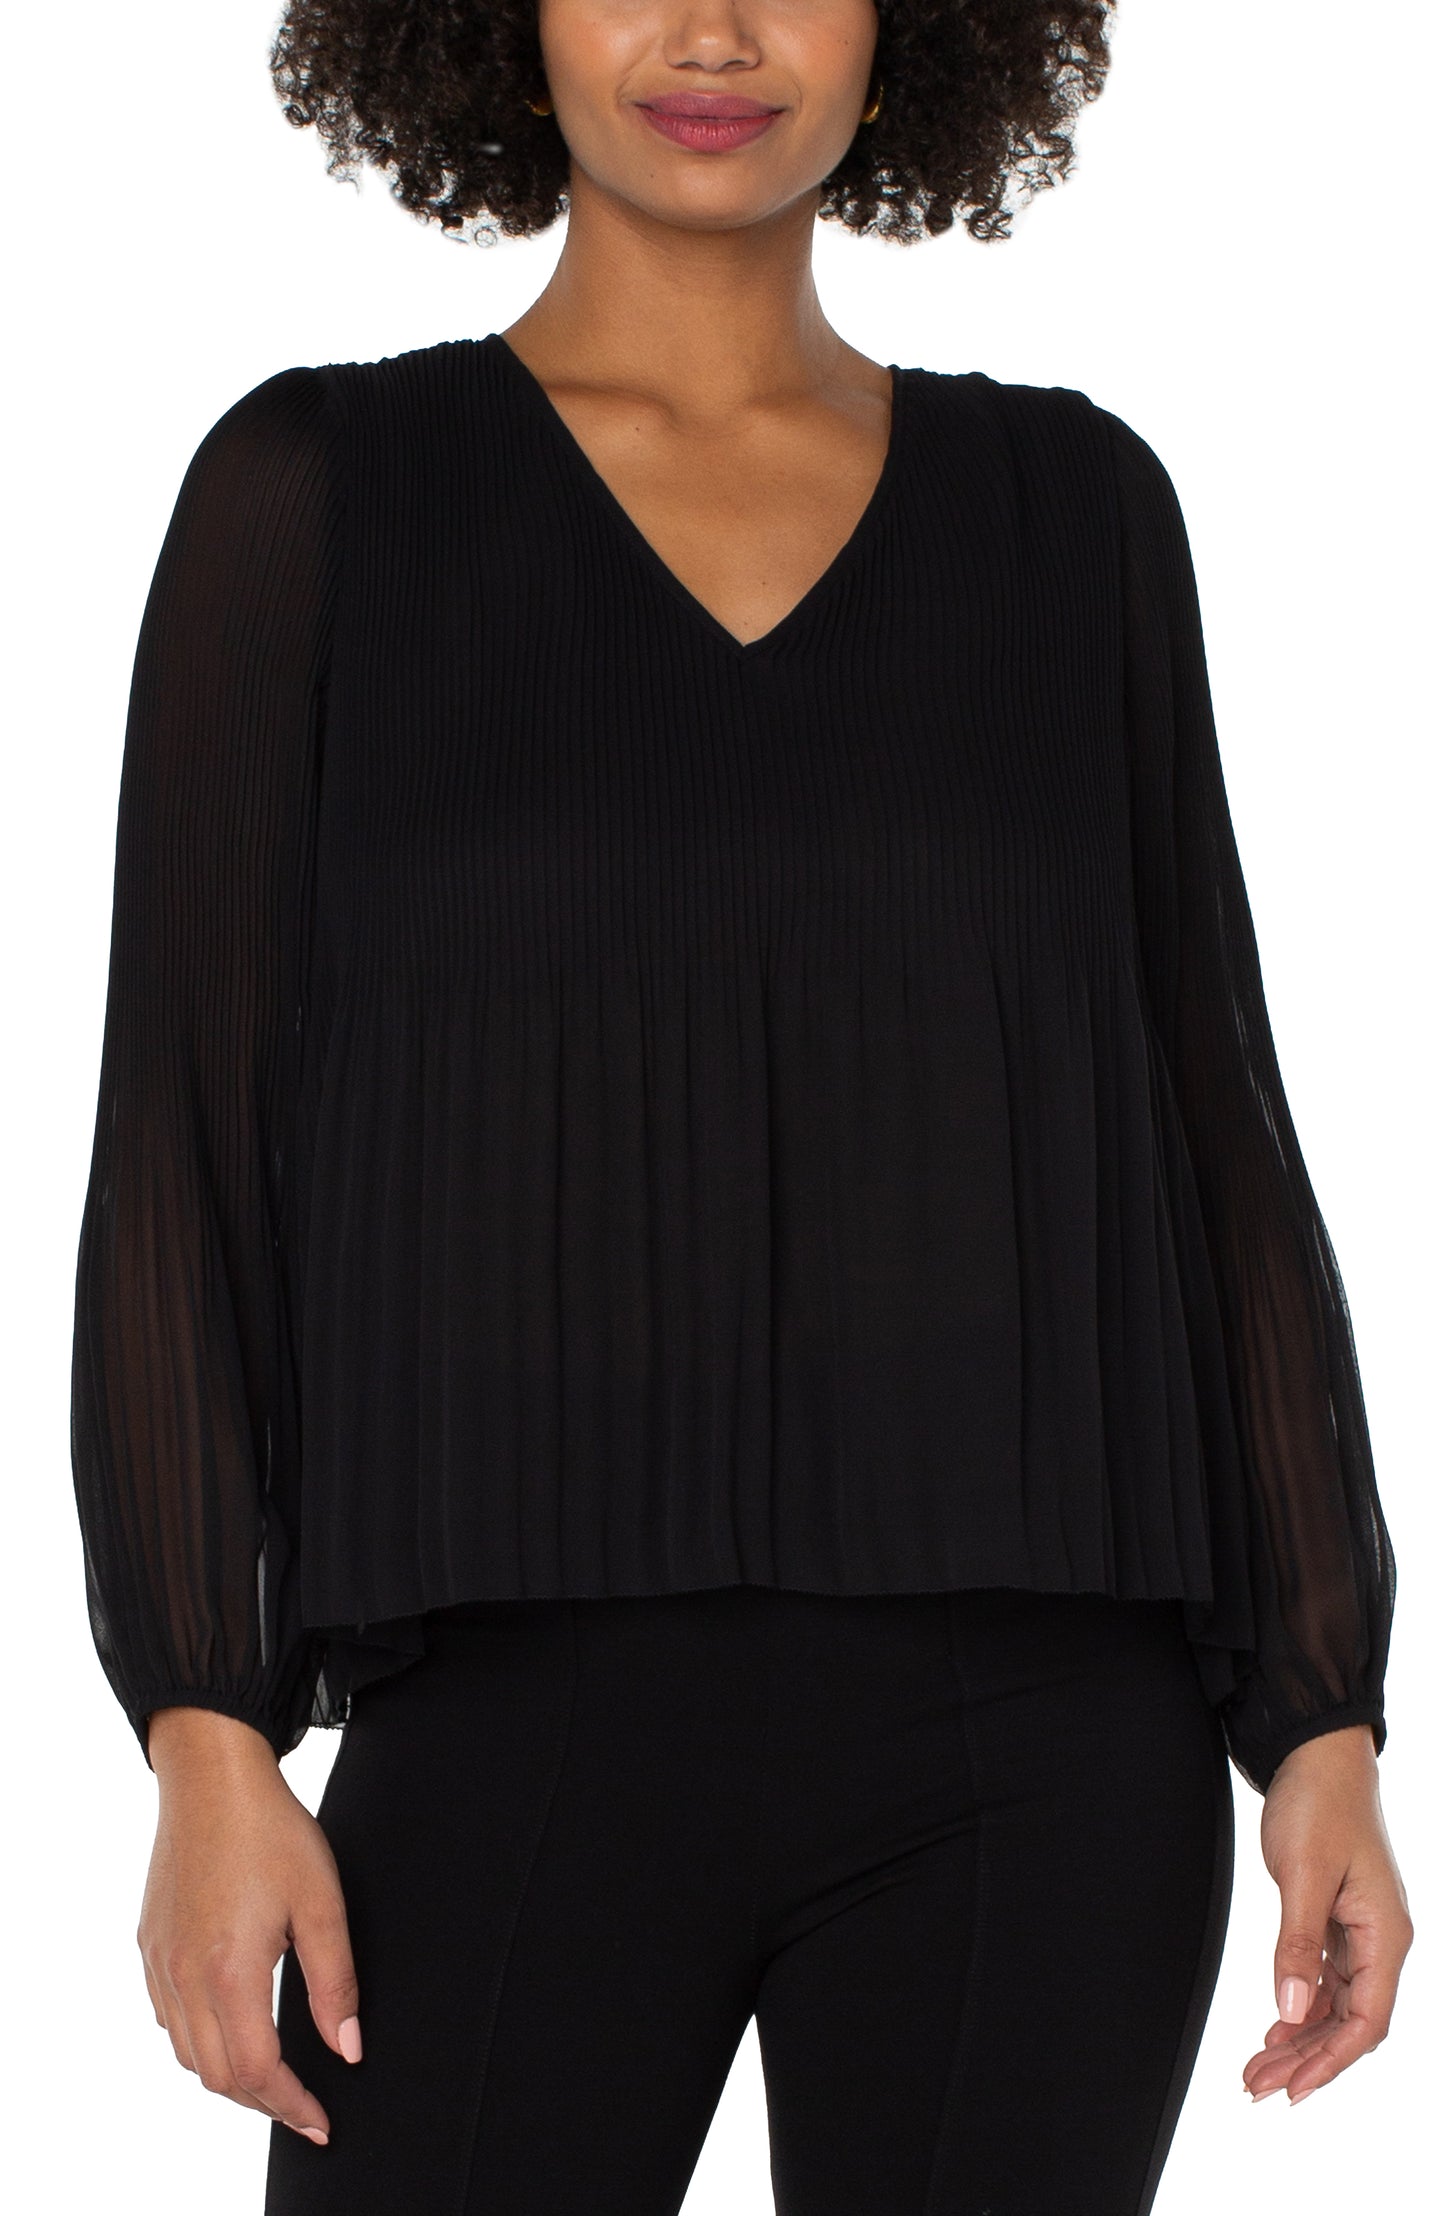 LIVERPOOL V-NECK LONG-SLEEVE PLEATED TOP - BLACK - LM8B16HD4001